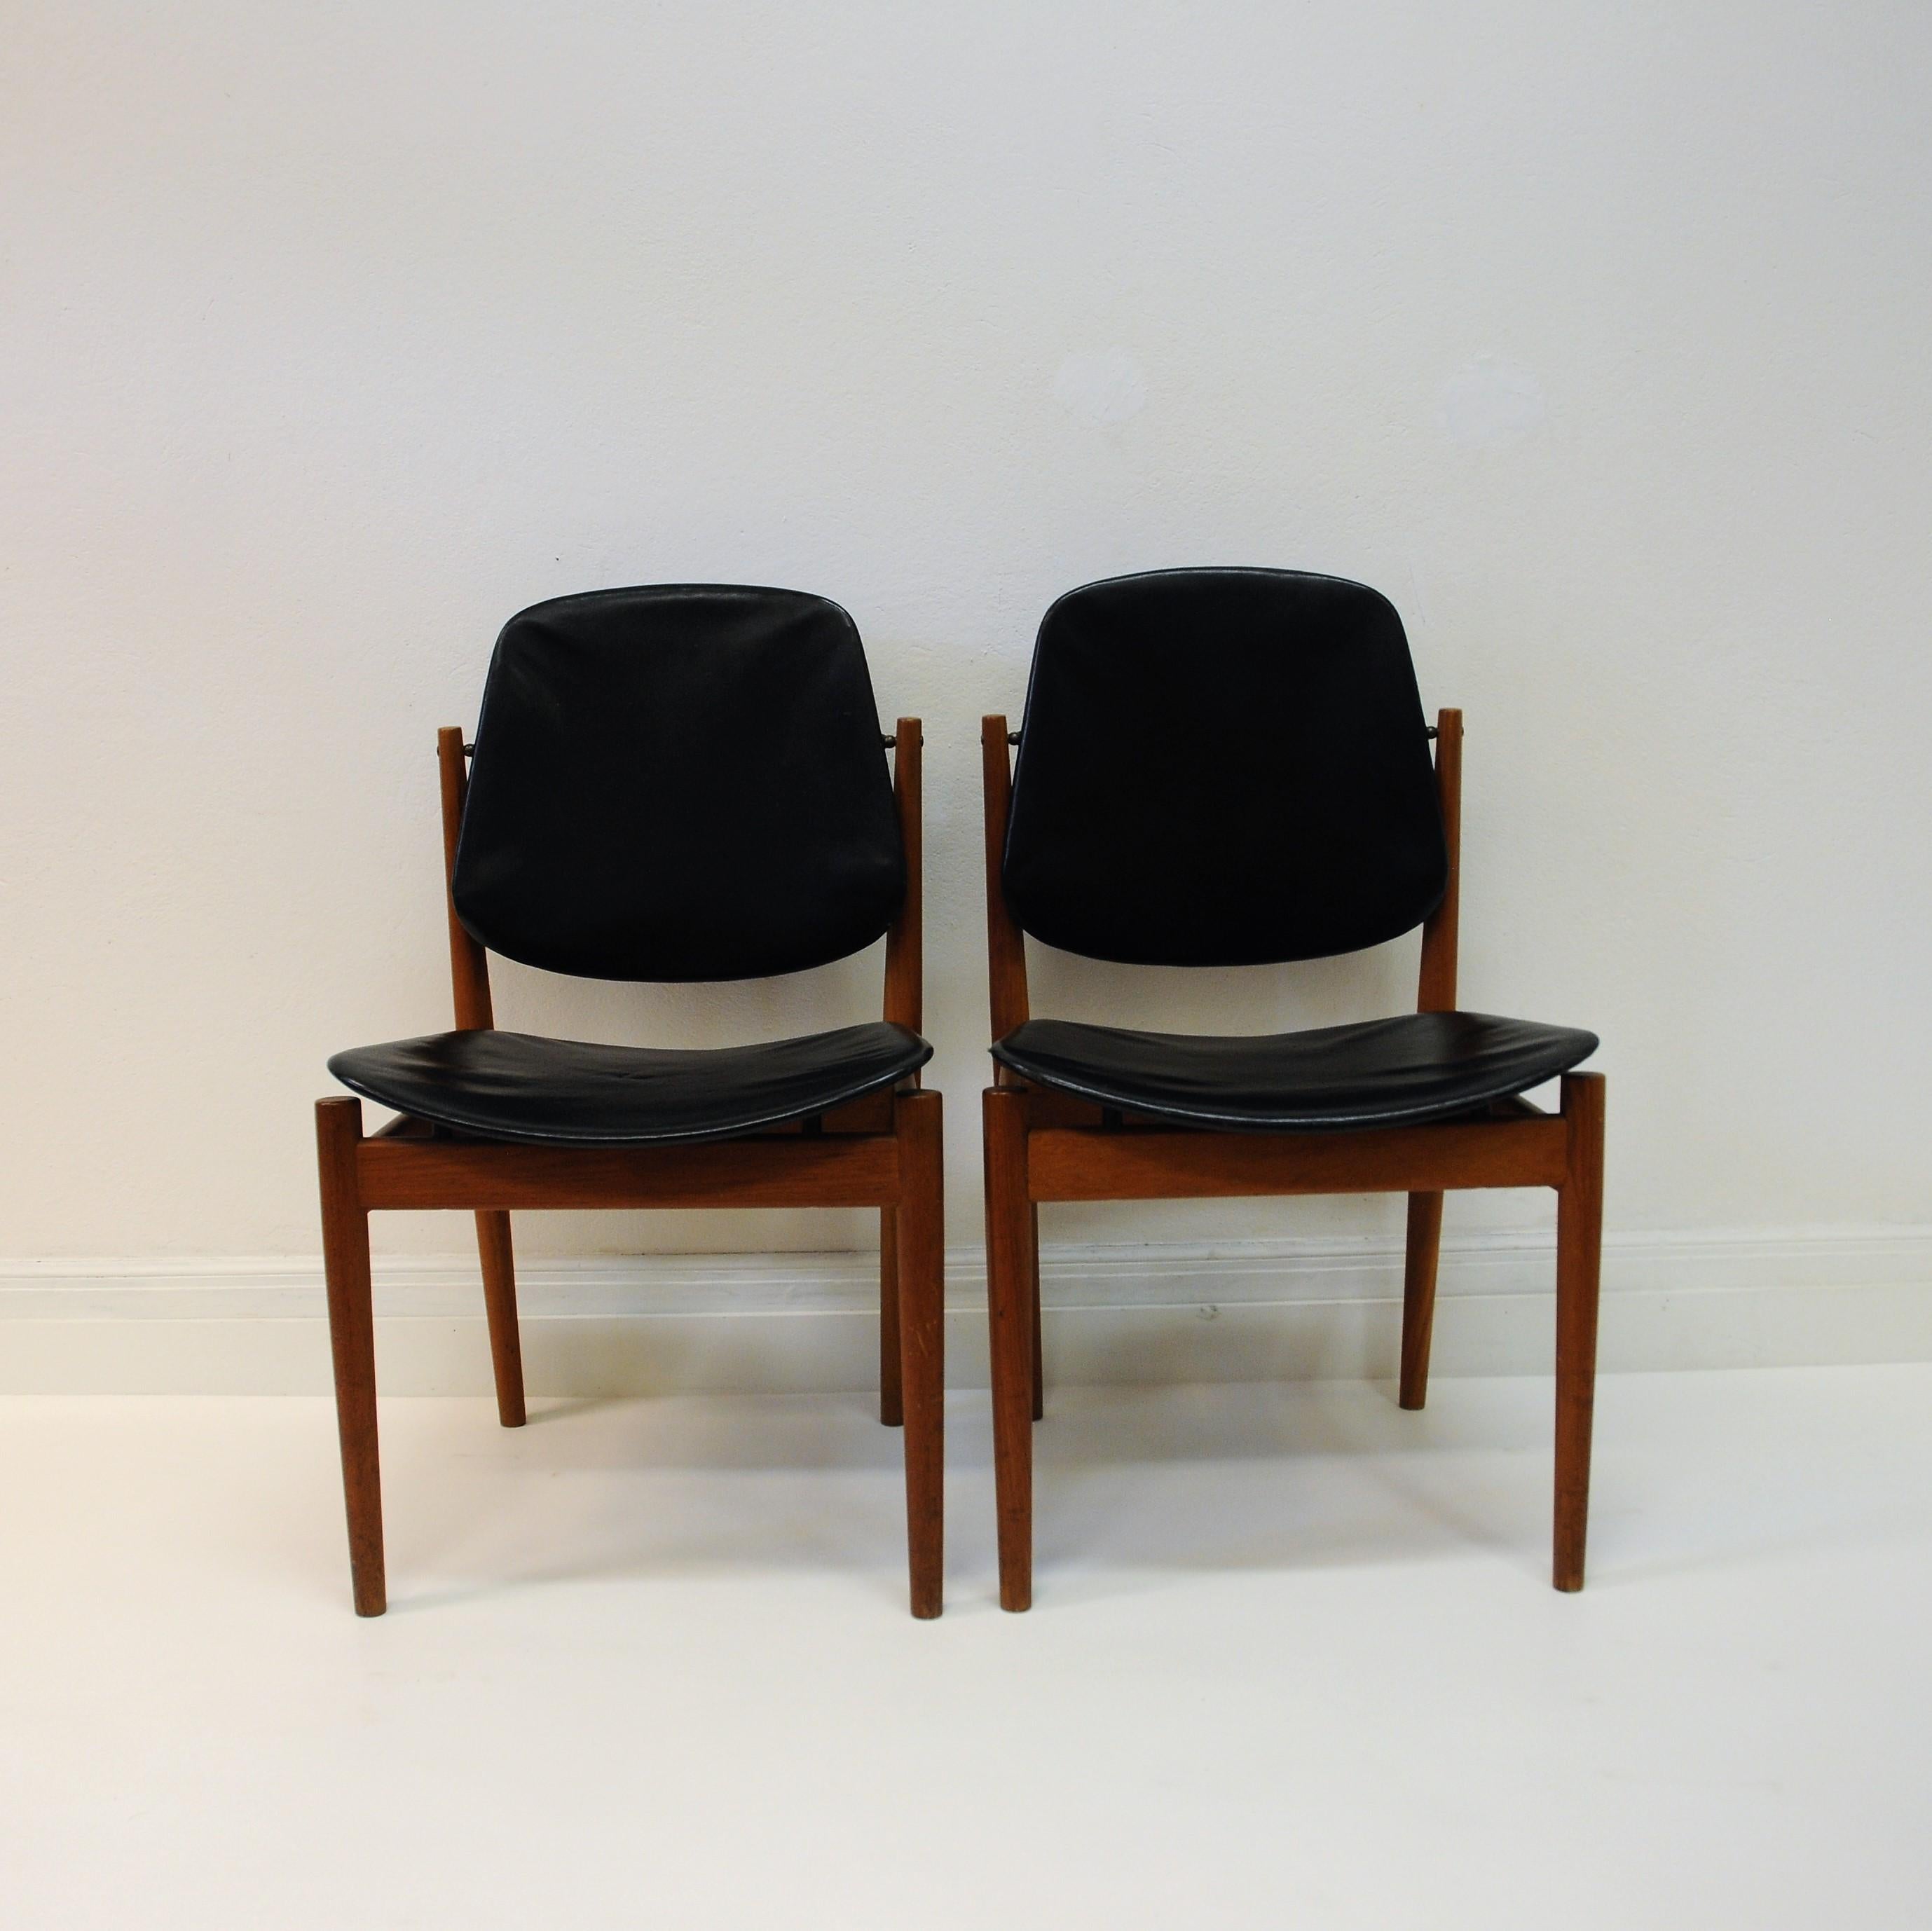 A nice pair of Arne Vodder dining chairs of solid teak and seats and backrests in the original black leather. These chairs has a tilting back part to adjust to a more comfortable seating. Designed 1956 and manufactured by France & Søn, Denmark.